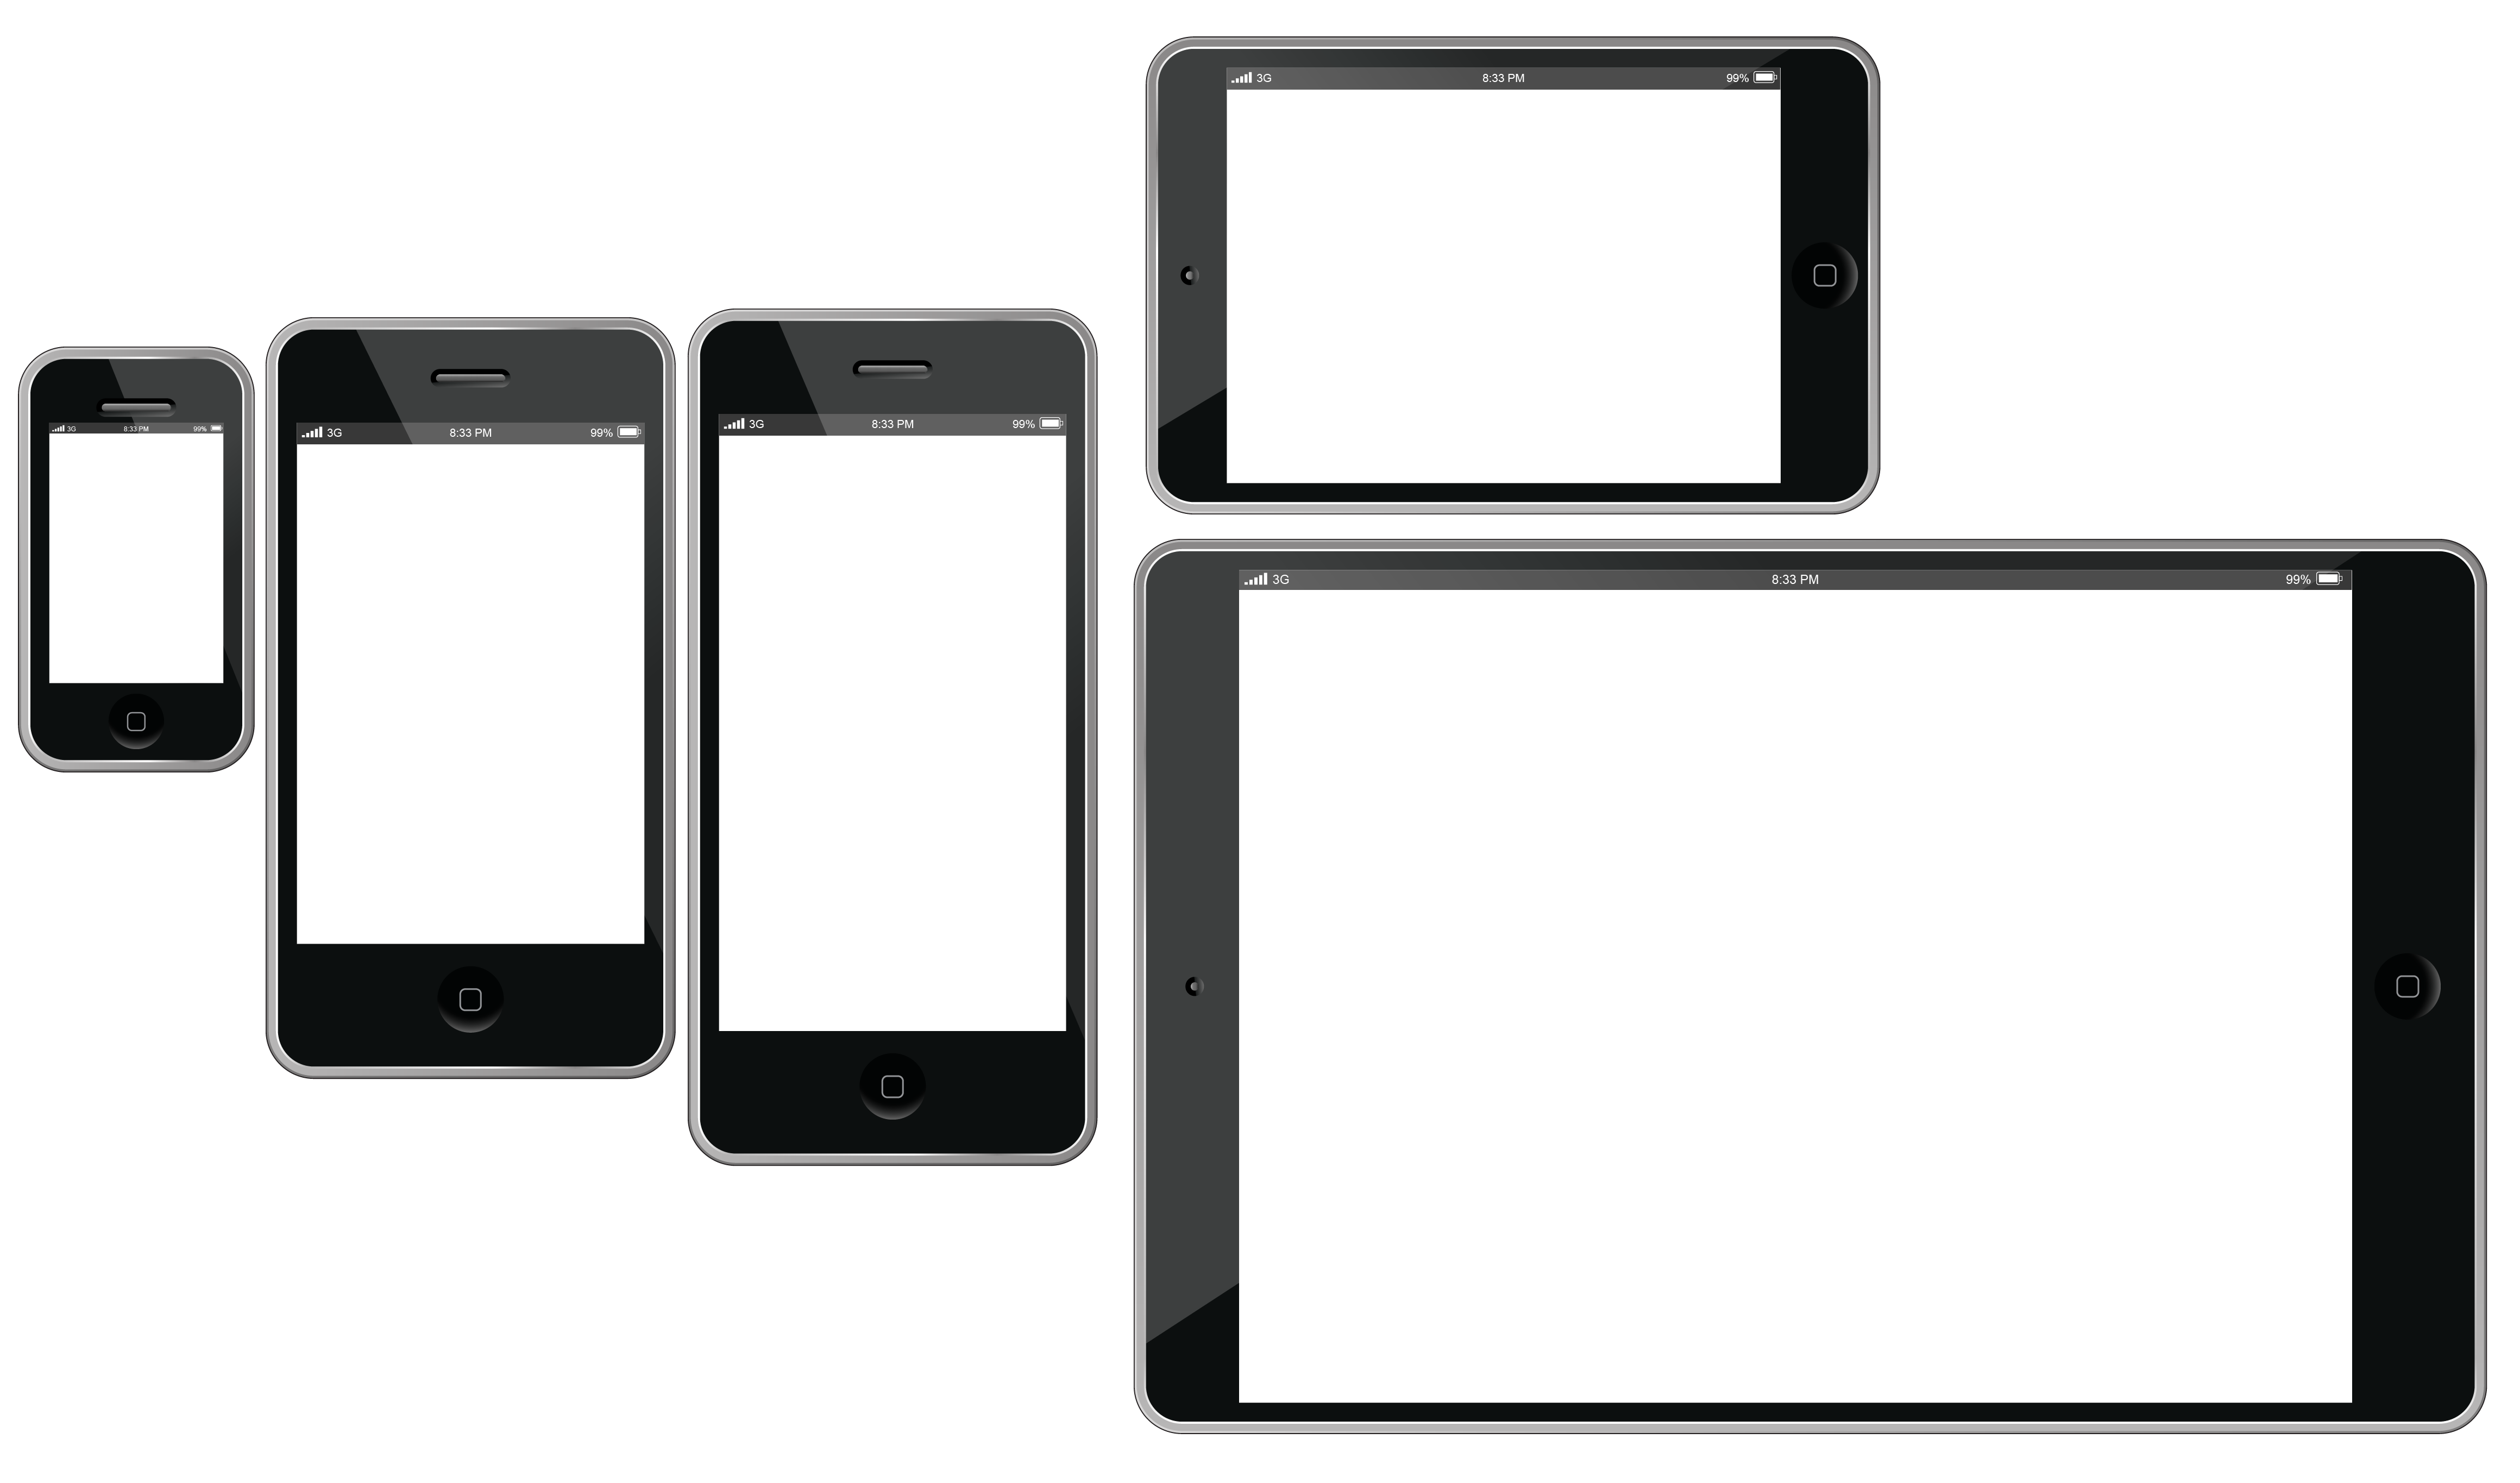 Responsive web design: key tips and approaches